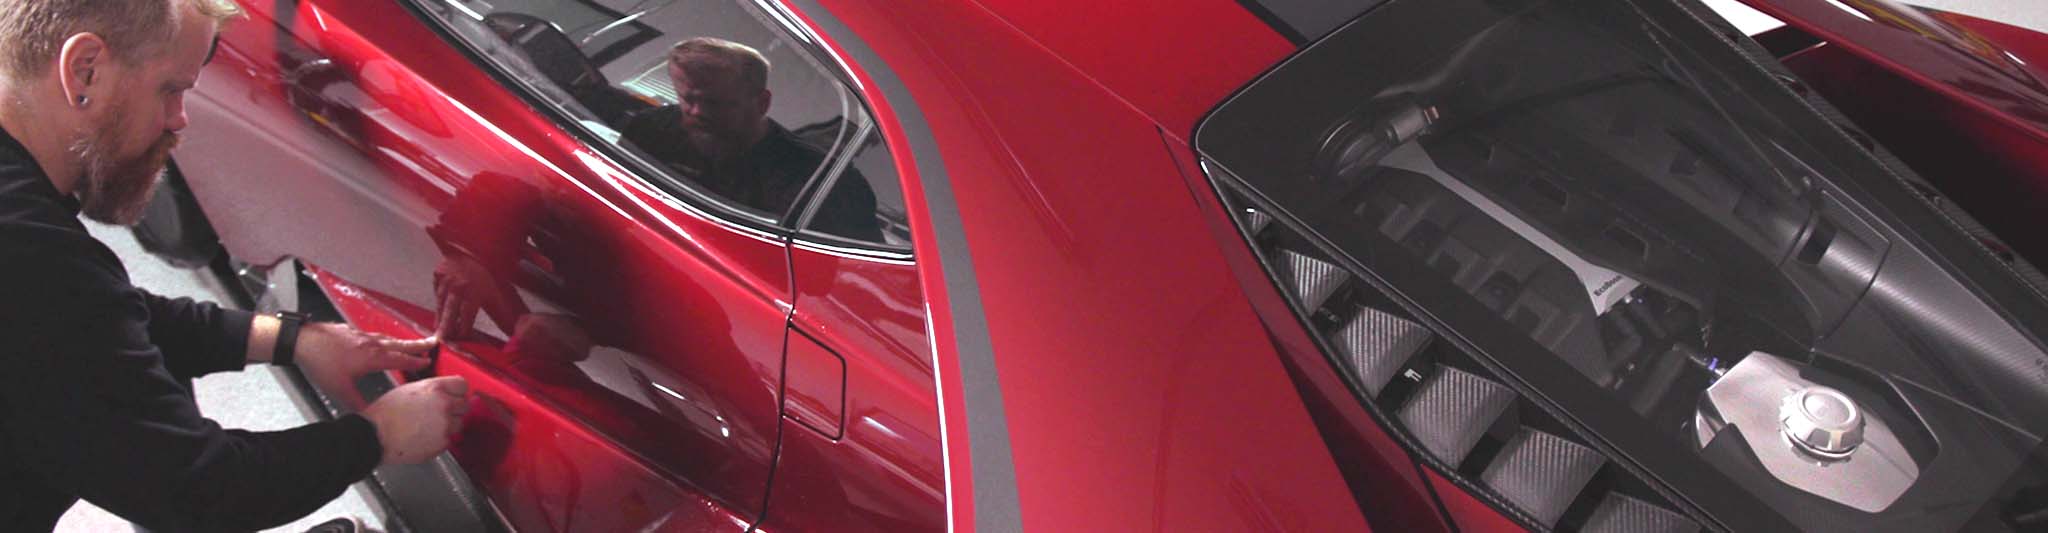 Paint Protection Film installer applying film to the door of a red sports car 